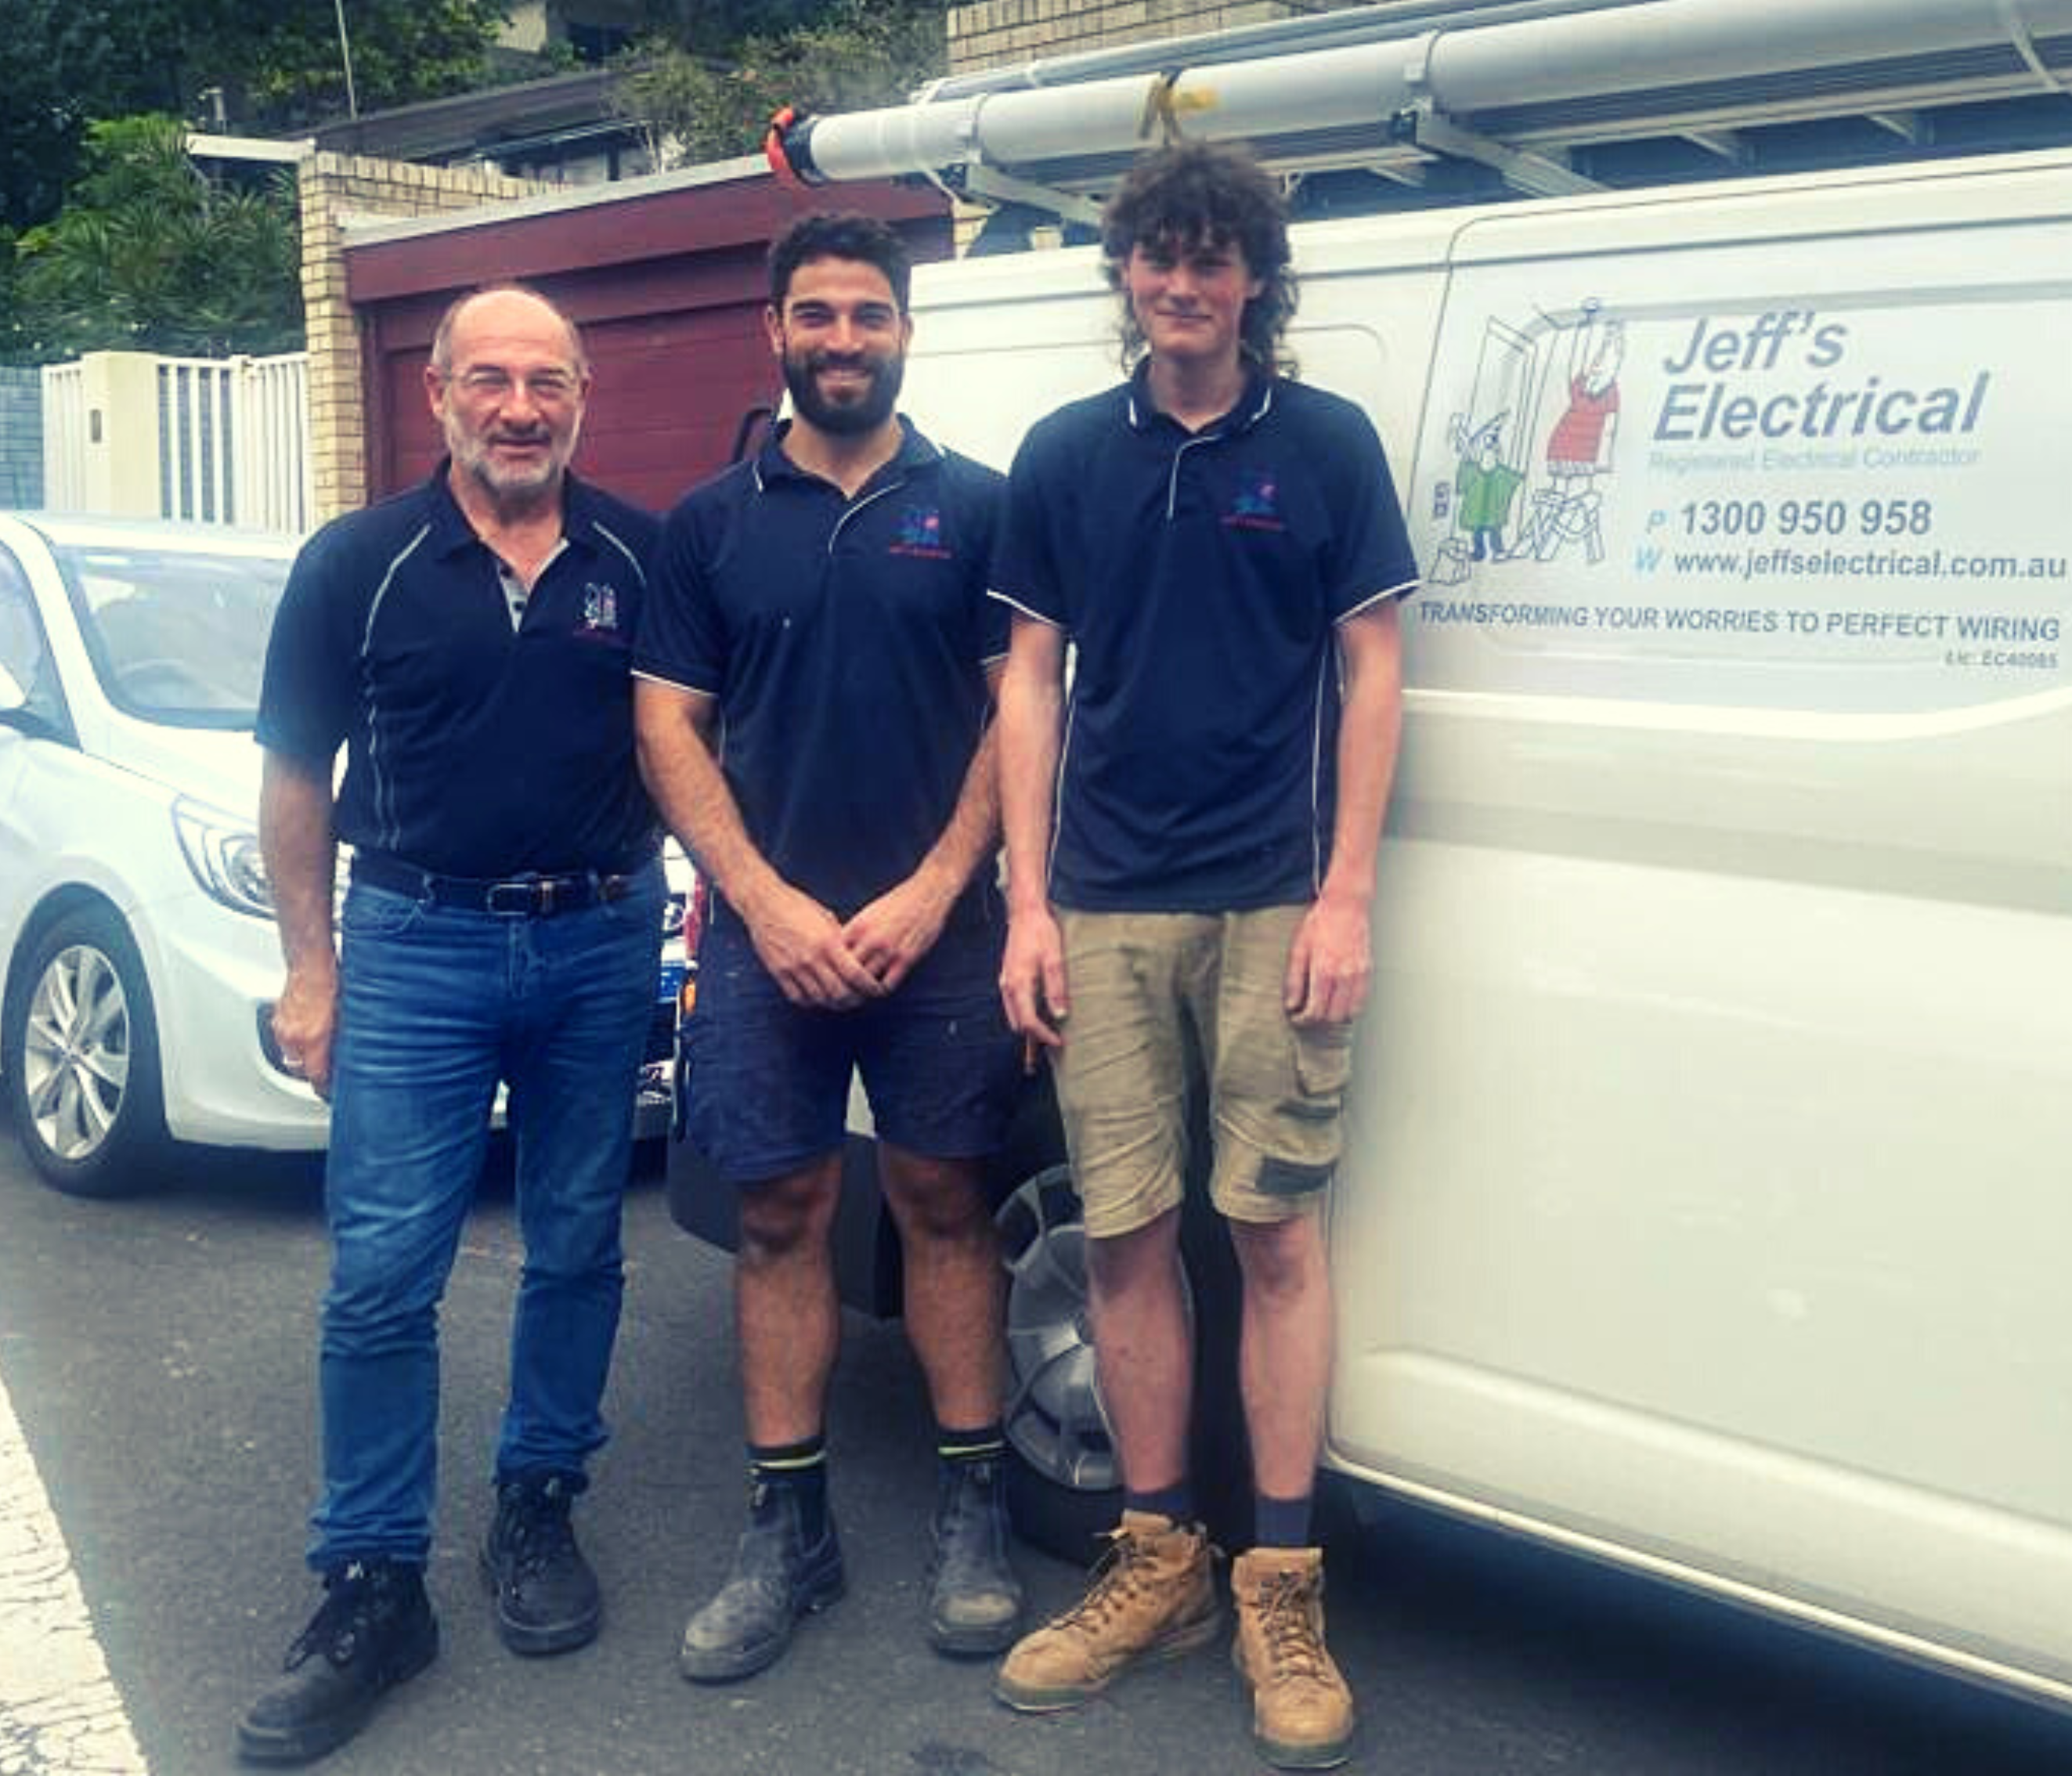 Jeff's Electrical Team in Sydney with their truck